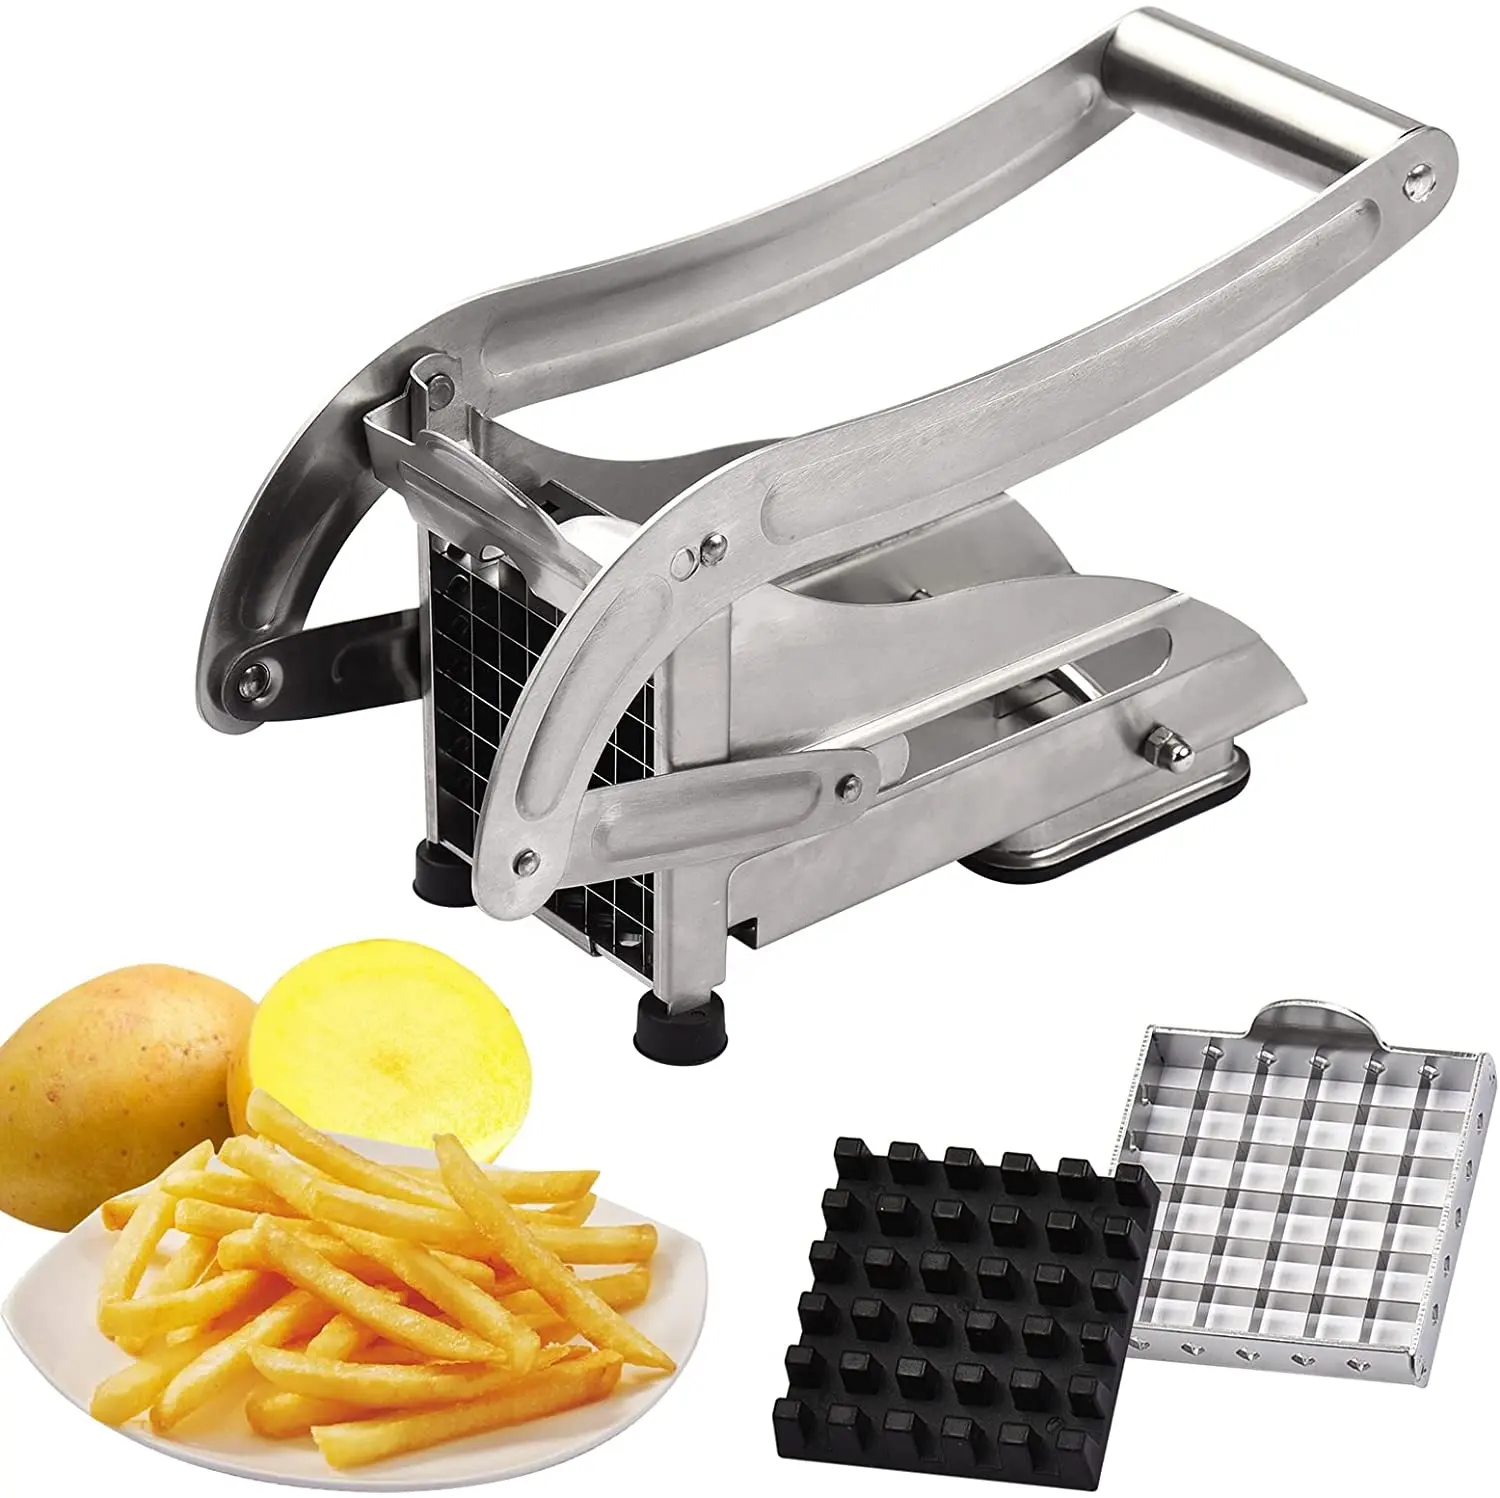 Stainless Steel Manual Potato Cutter French Fries Slicer Potato Chips Maker Meat Chopper Dicer Cutting Machine Tools for Kitchen